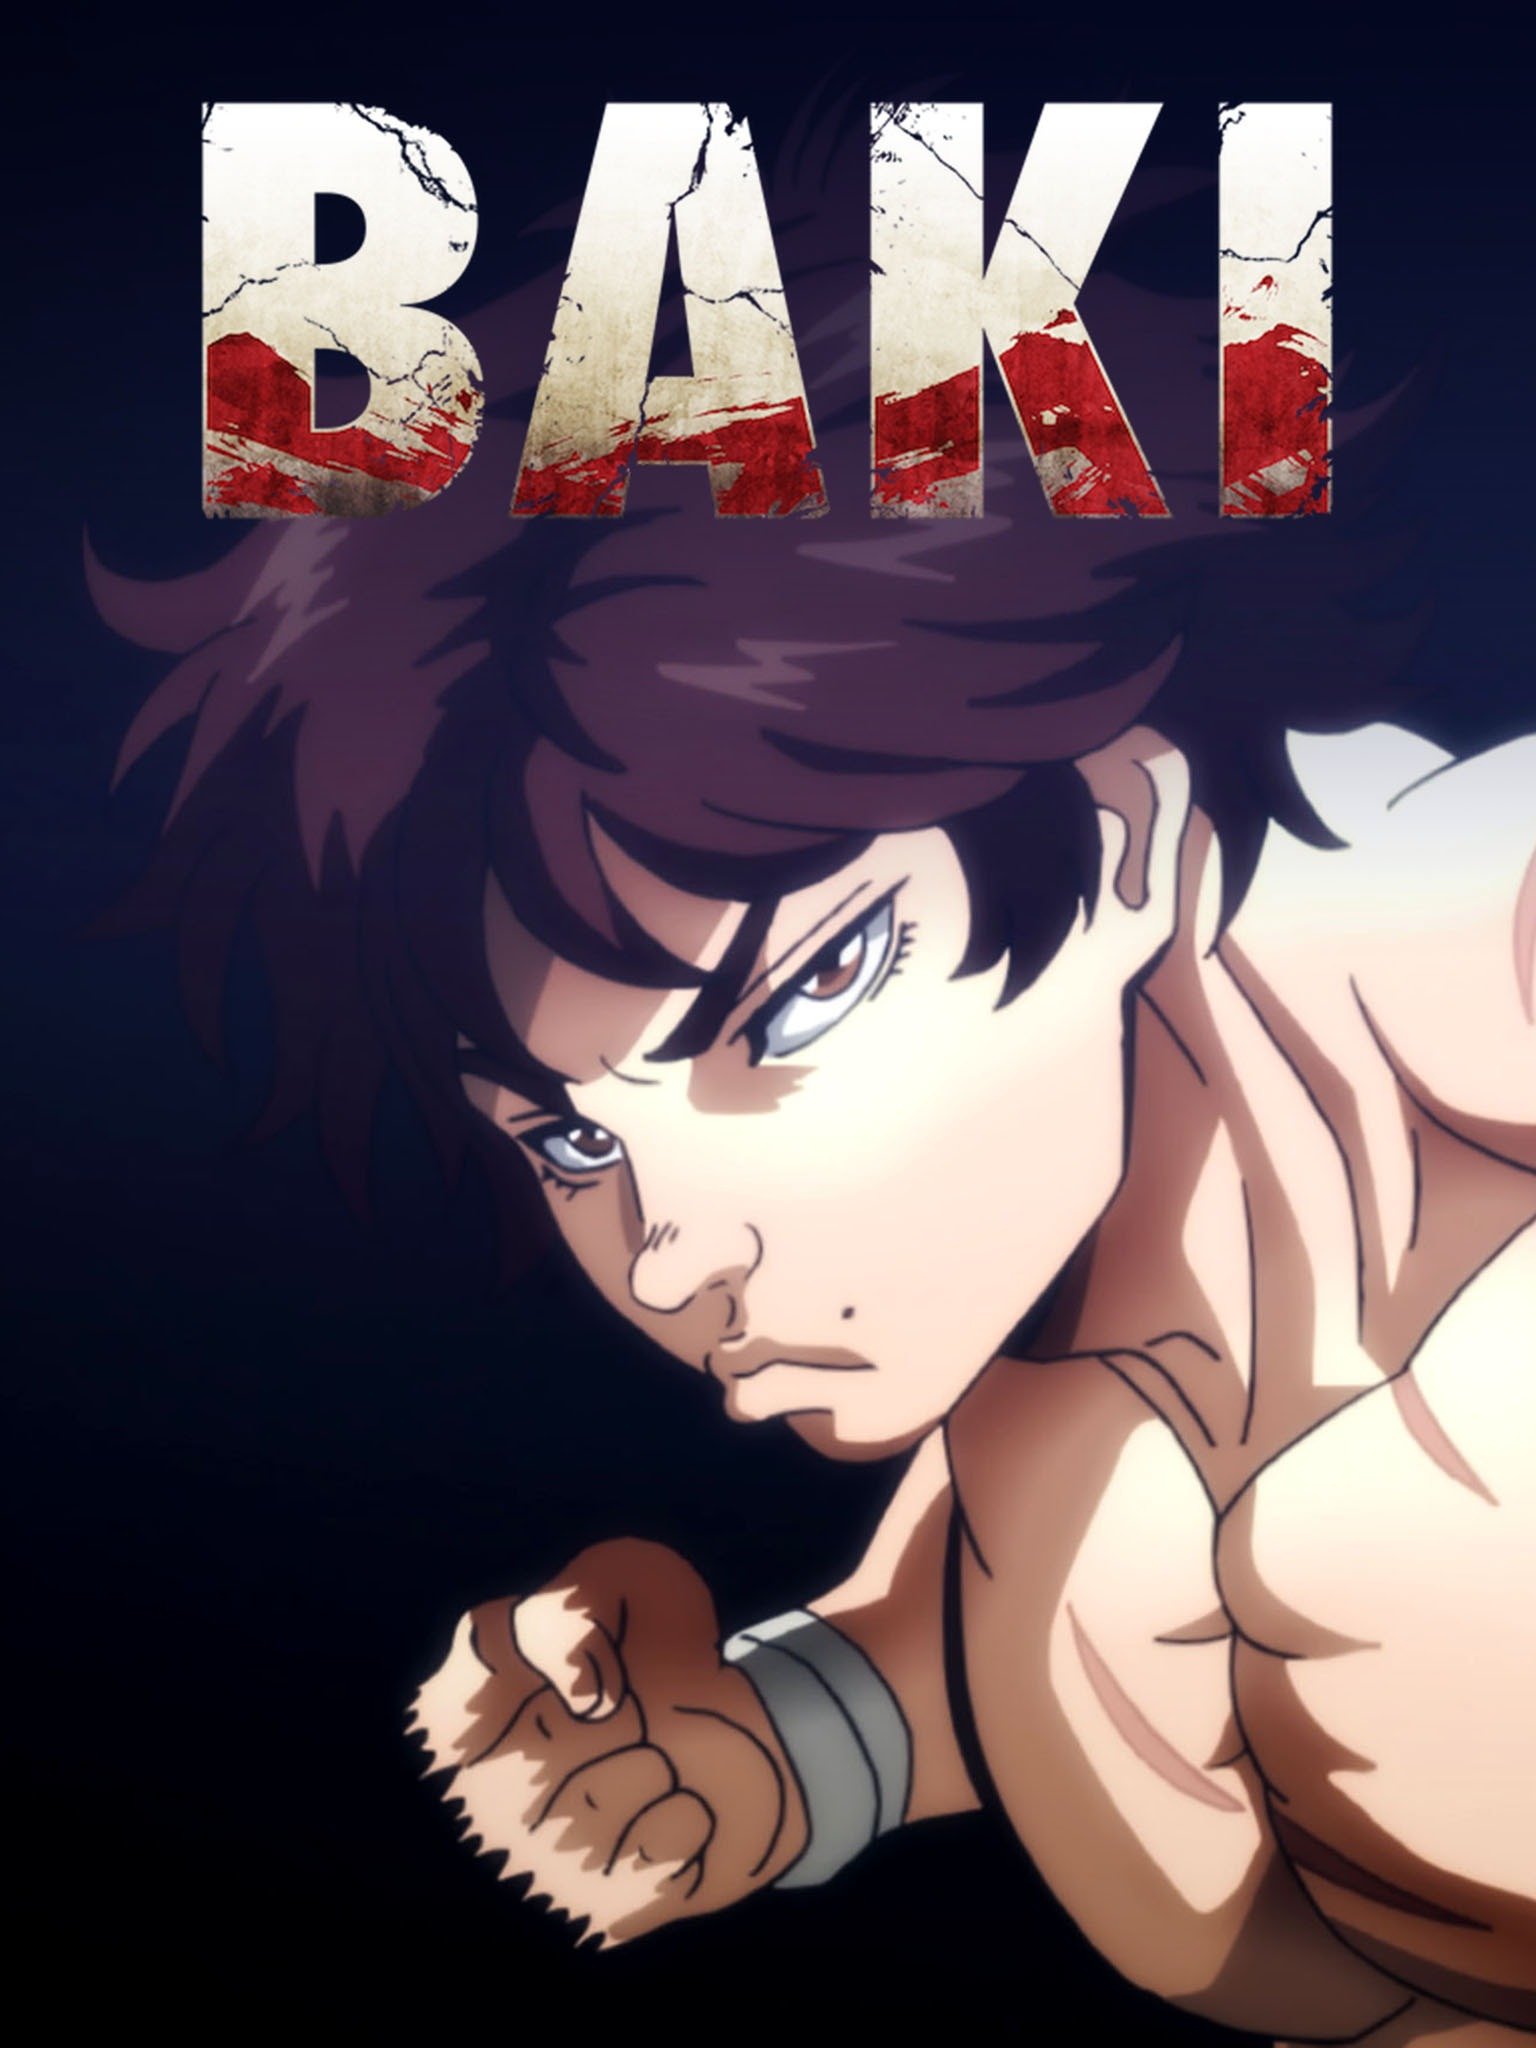 Epic Stuff Baki  Yujiro Hanma Design A4 Wall Poster With Frame  Best  Gifts For BakiAnime FandomGreat Accessory For Home  Amazonin Home   Kitchen